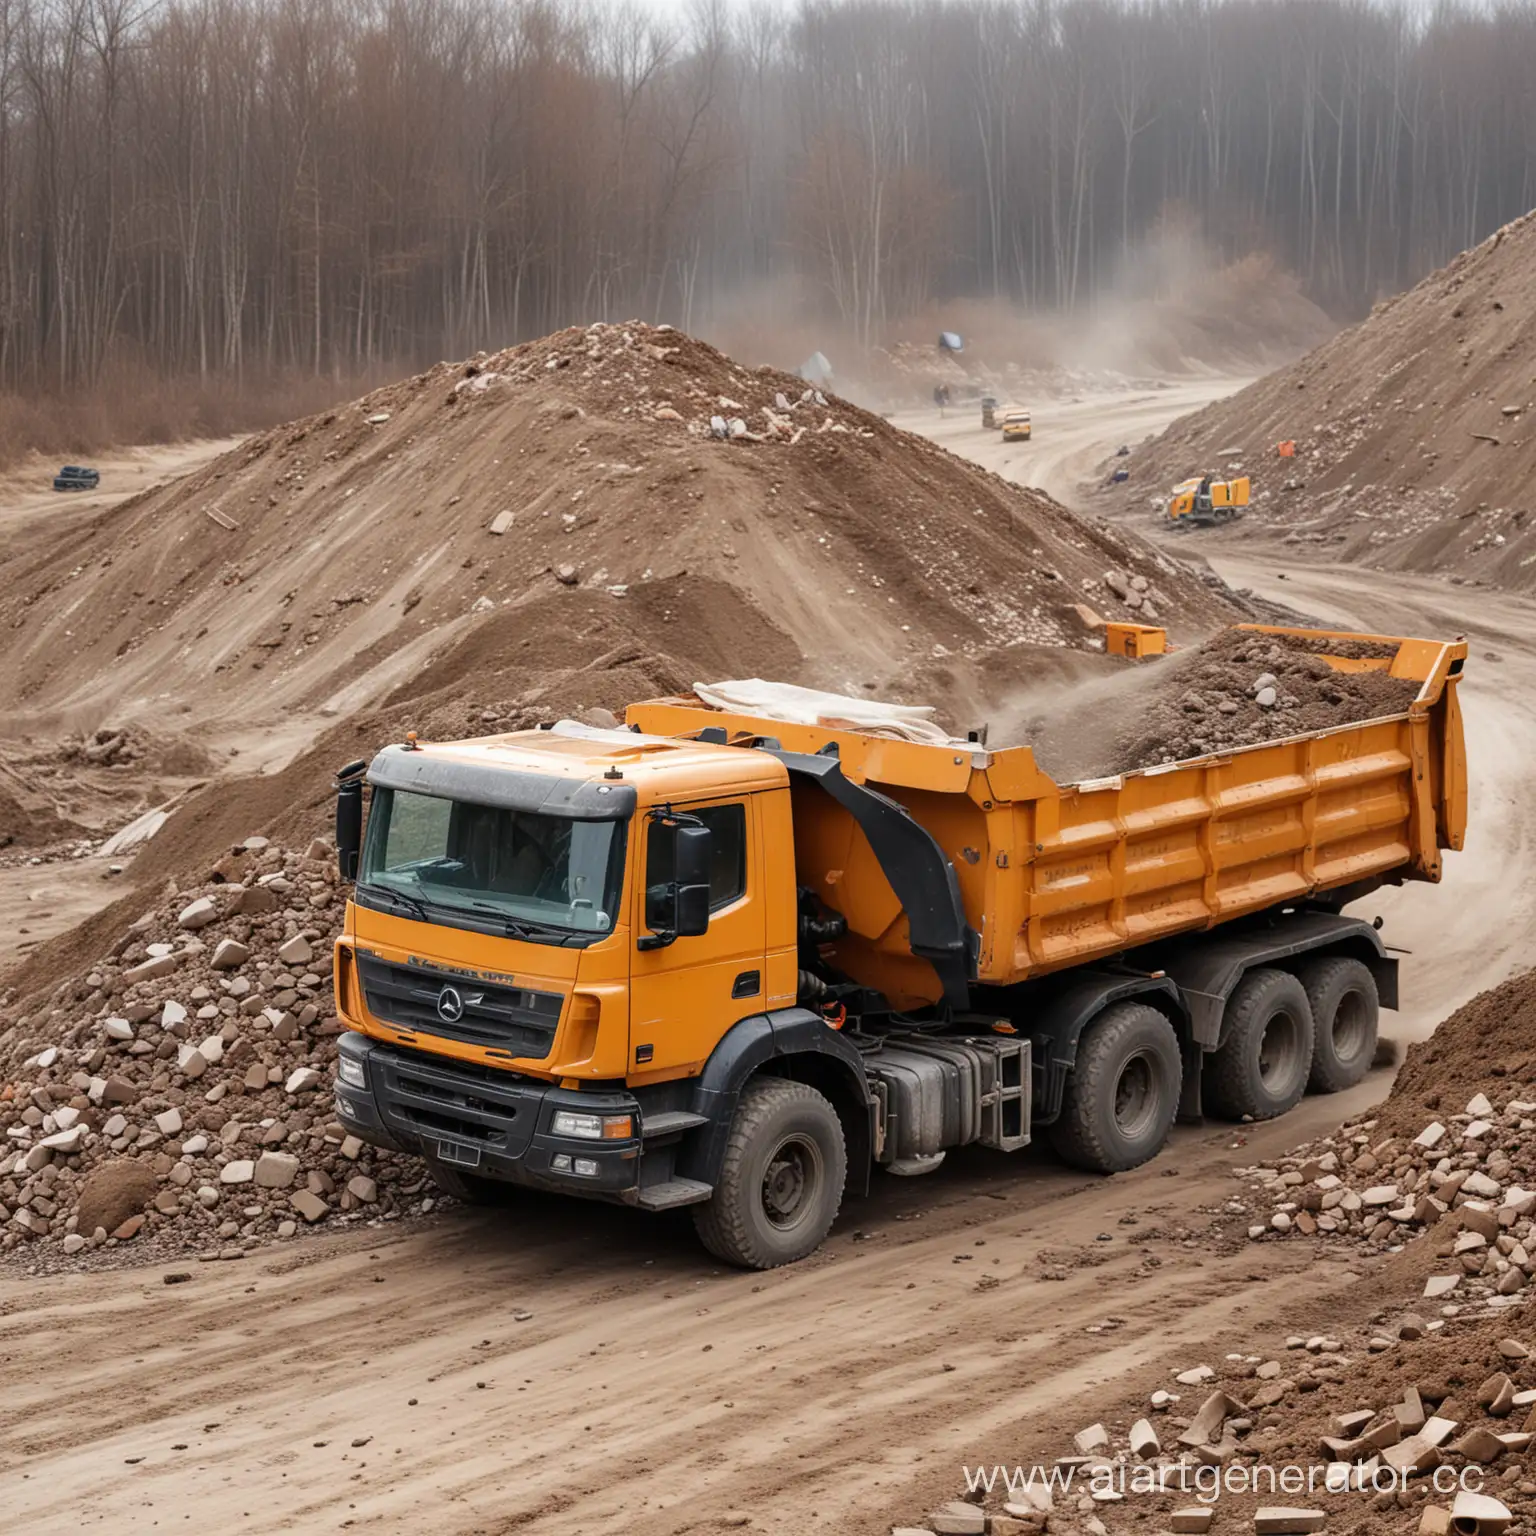 Construction-Waste-Removal-Dump-Truck-on-Site